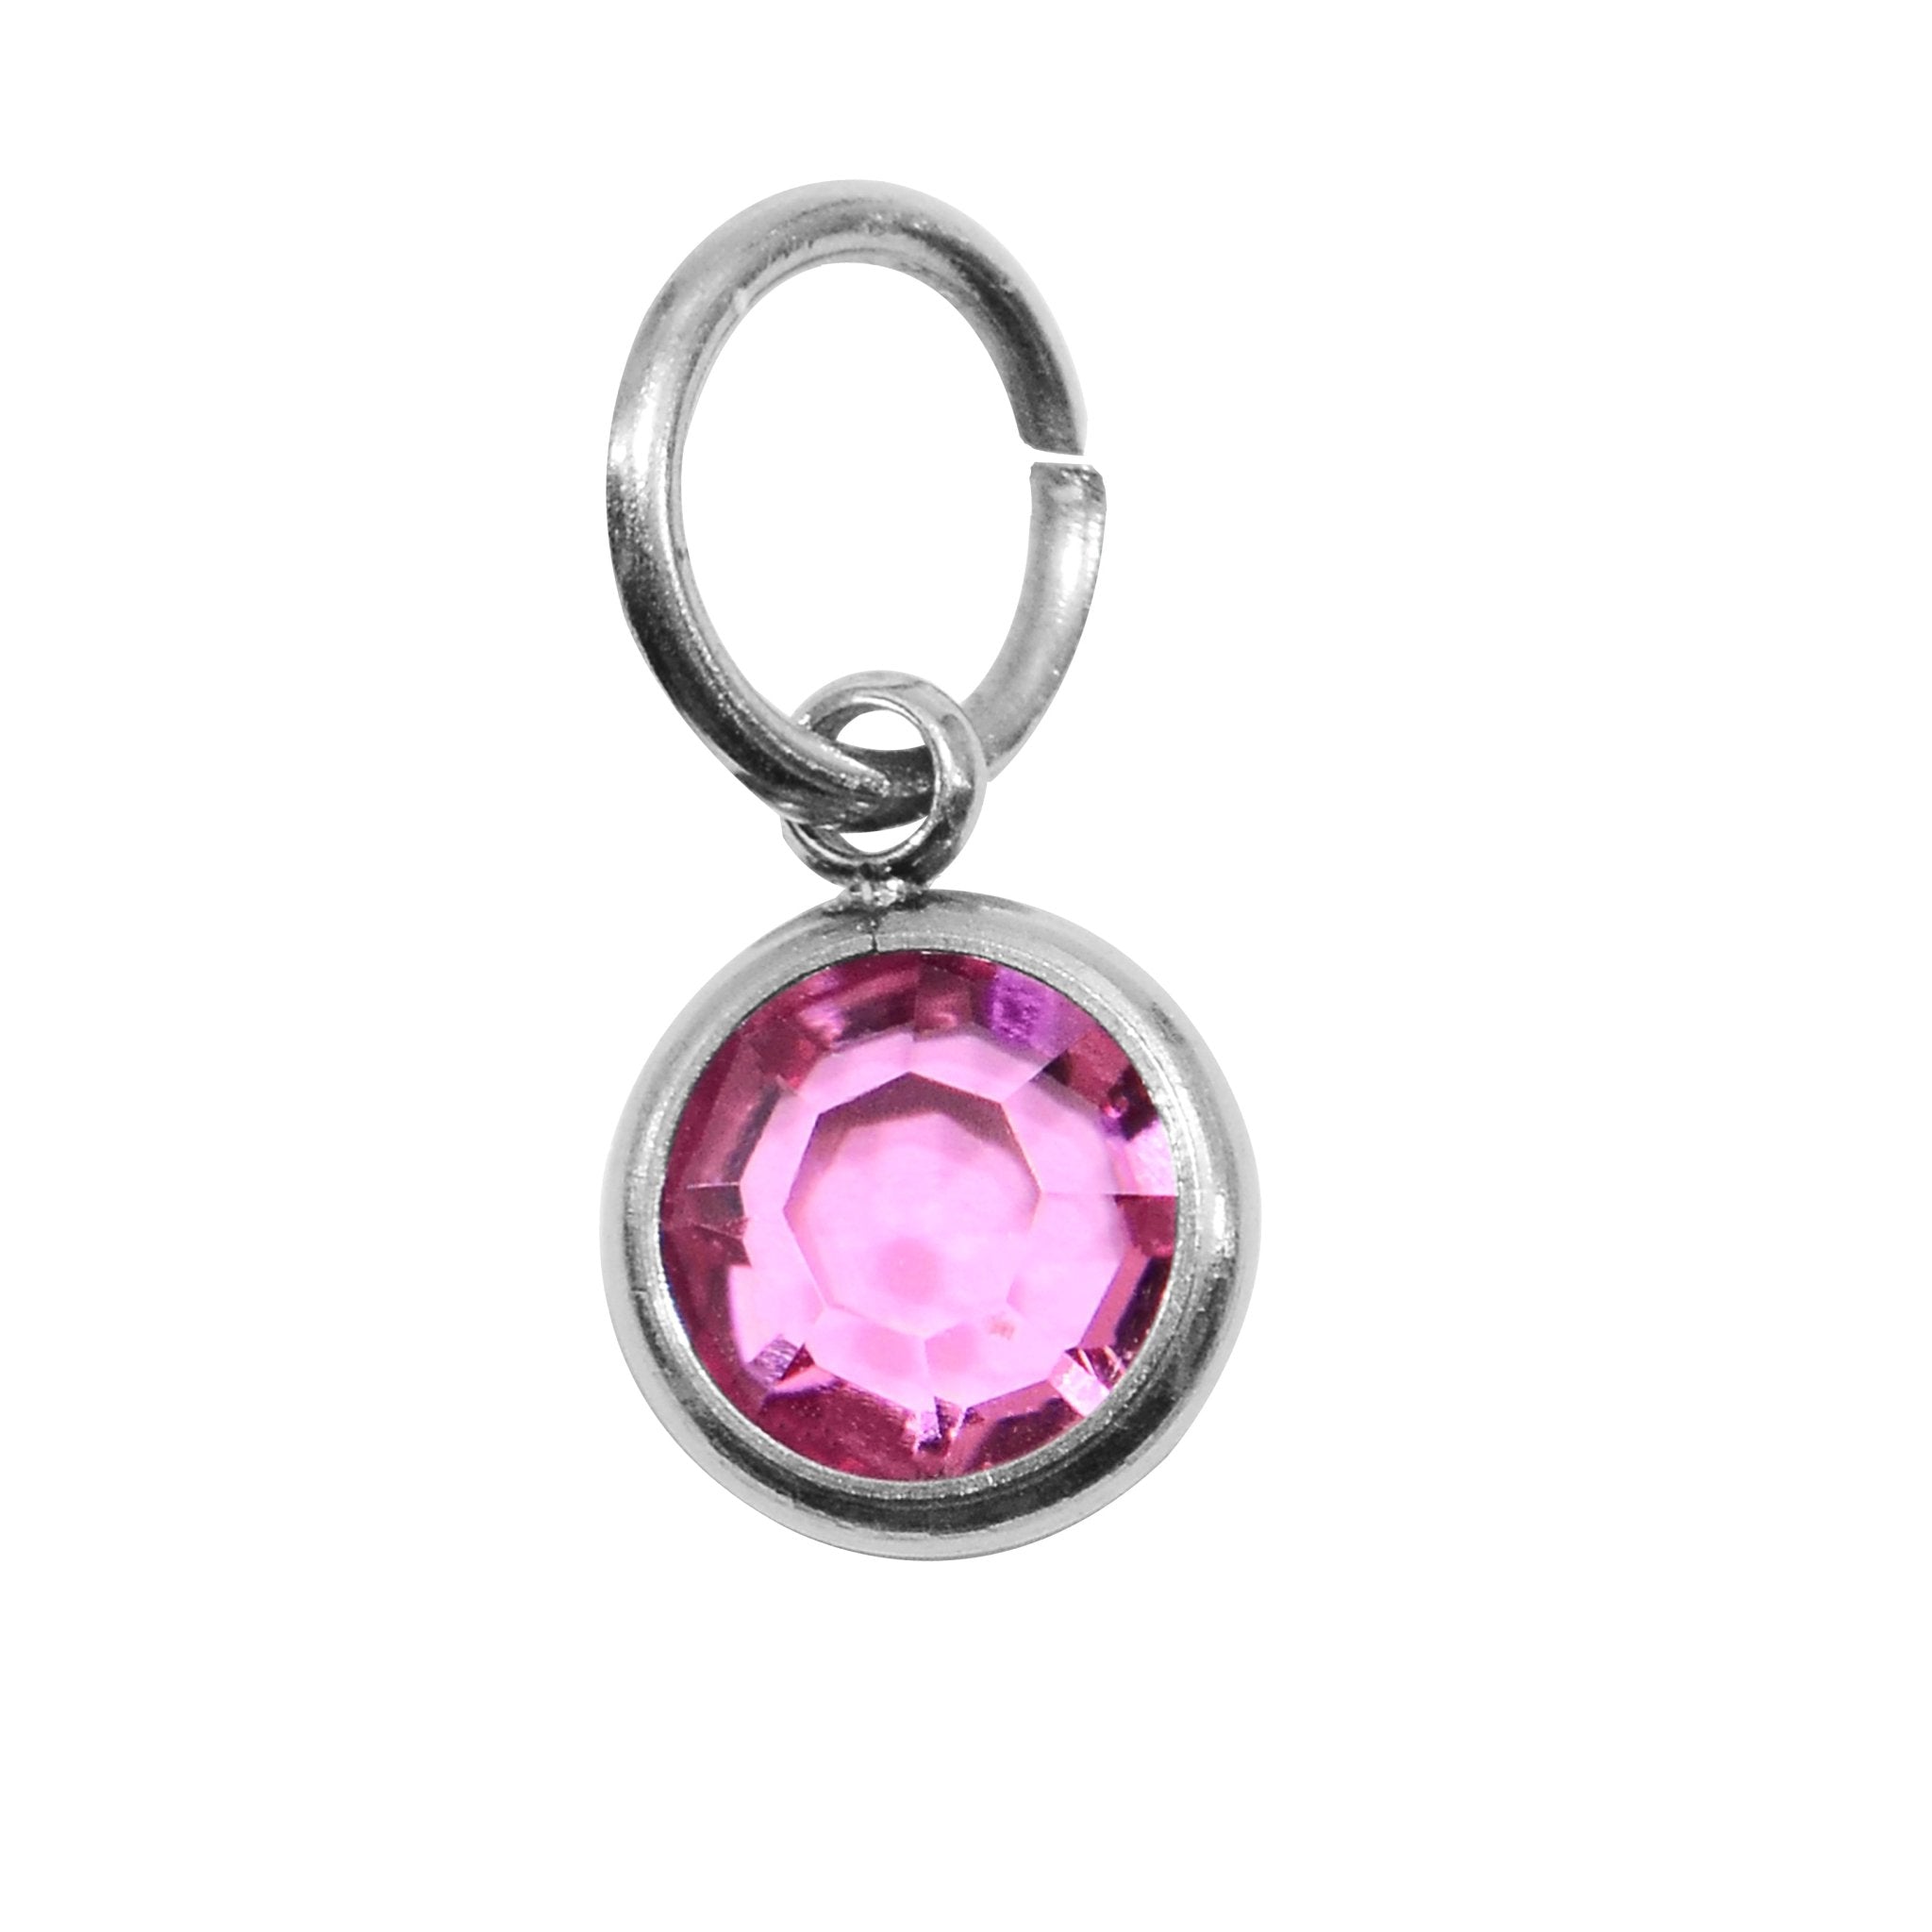 1st SILVER Hanging Birthstone Charm (Optional) - Options Variants